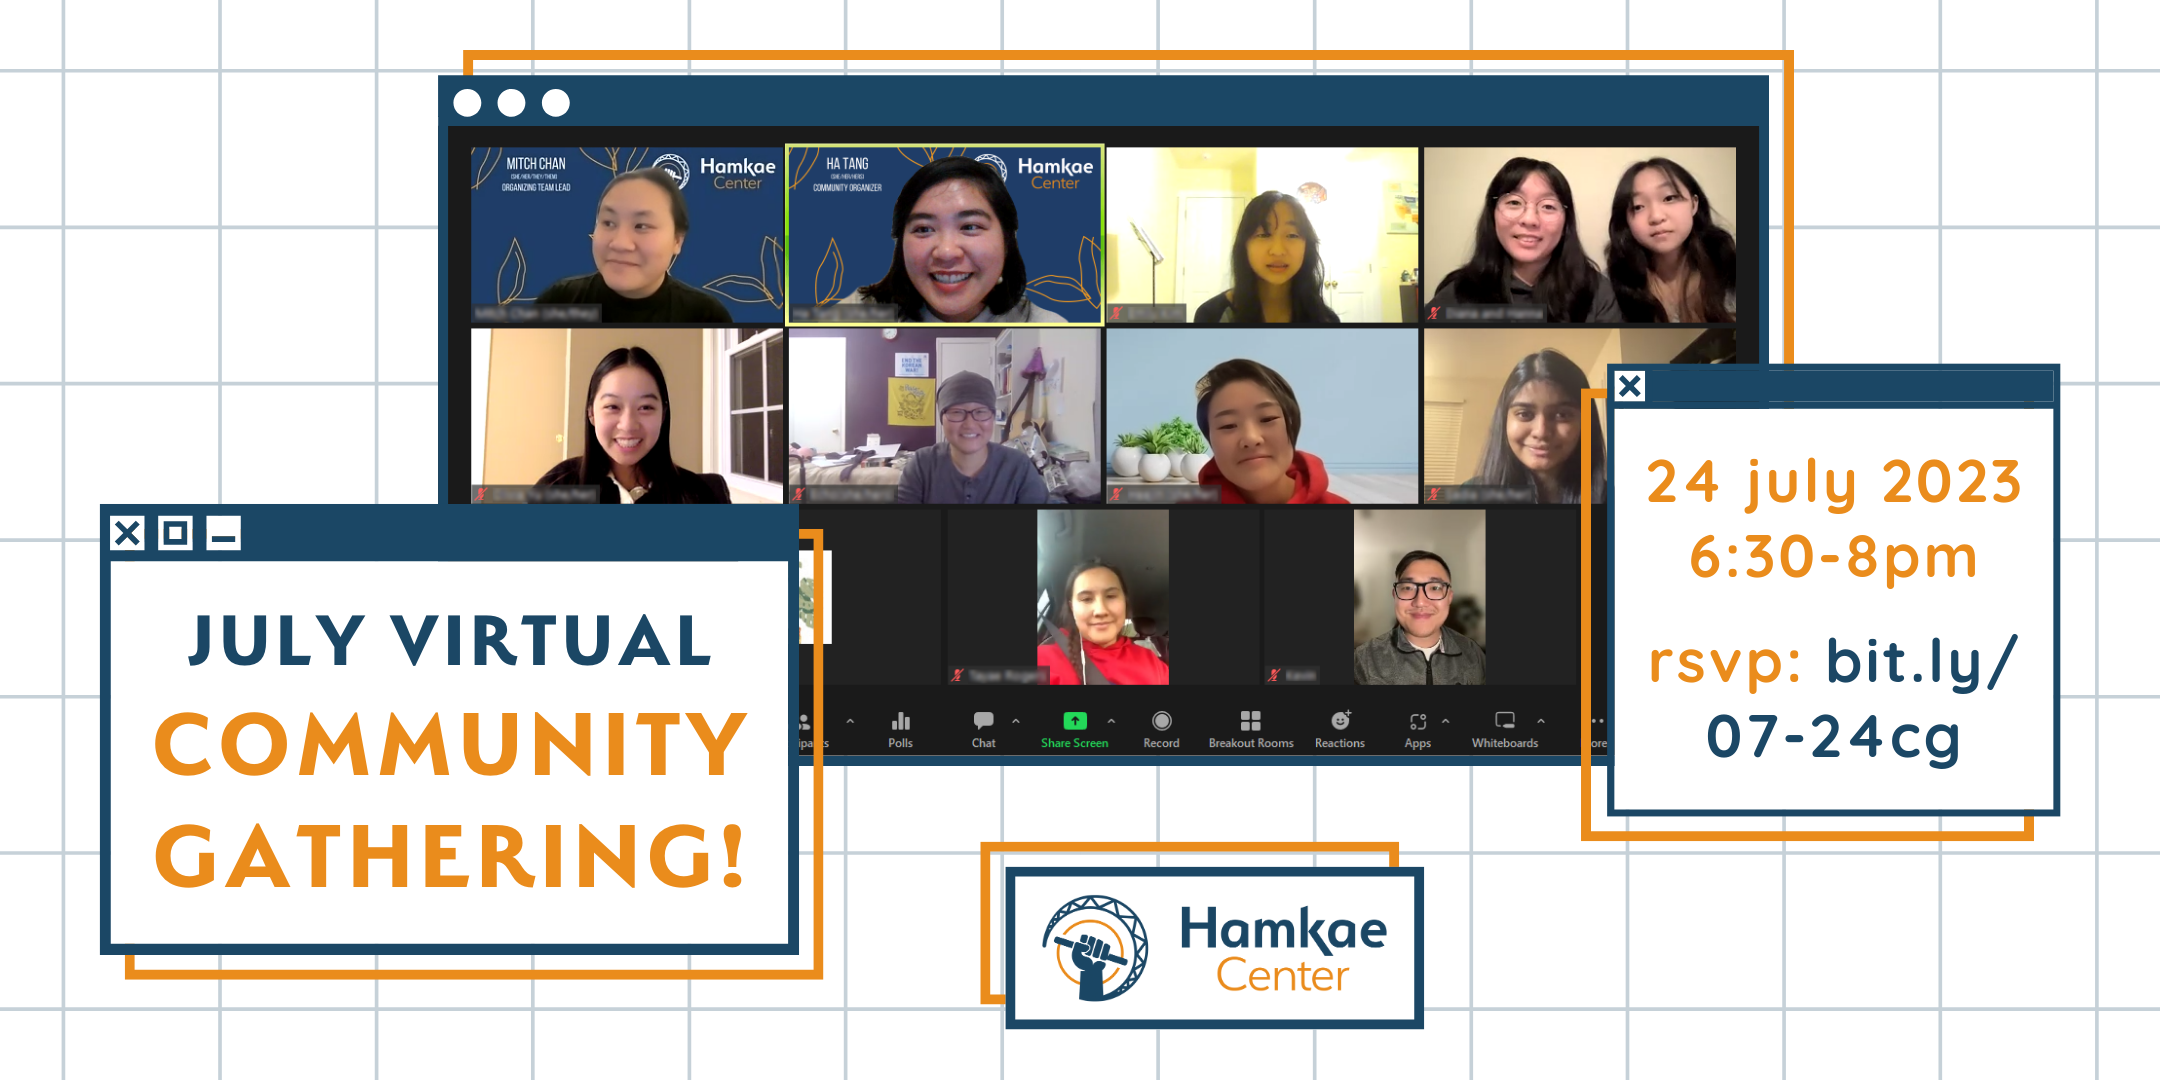 Graphic with a photo of Hamkae Center staff and community members smiling for a screenshot during a virtual meeting, advertising Hamkae Center's July Virtual Community Gathering on July 24, 2023 at 6:30-8pm. RSVP: bit.ly/07-24cg